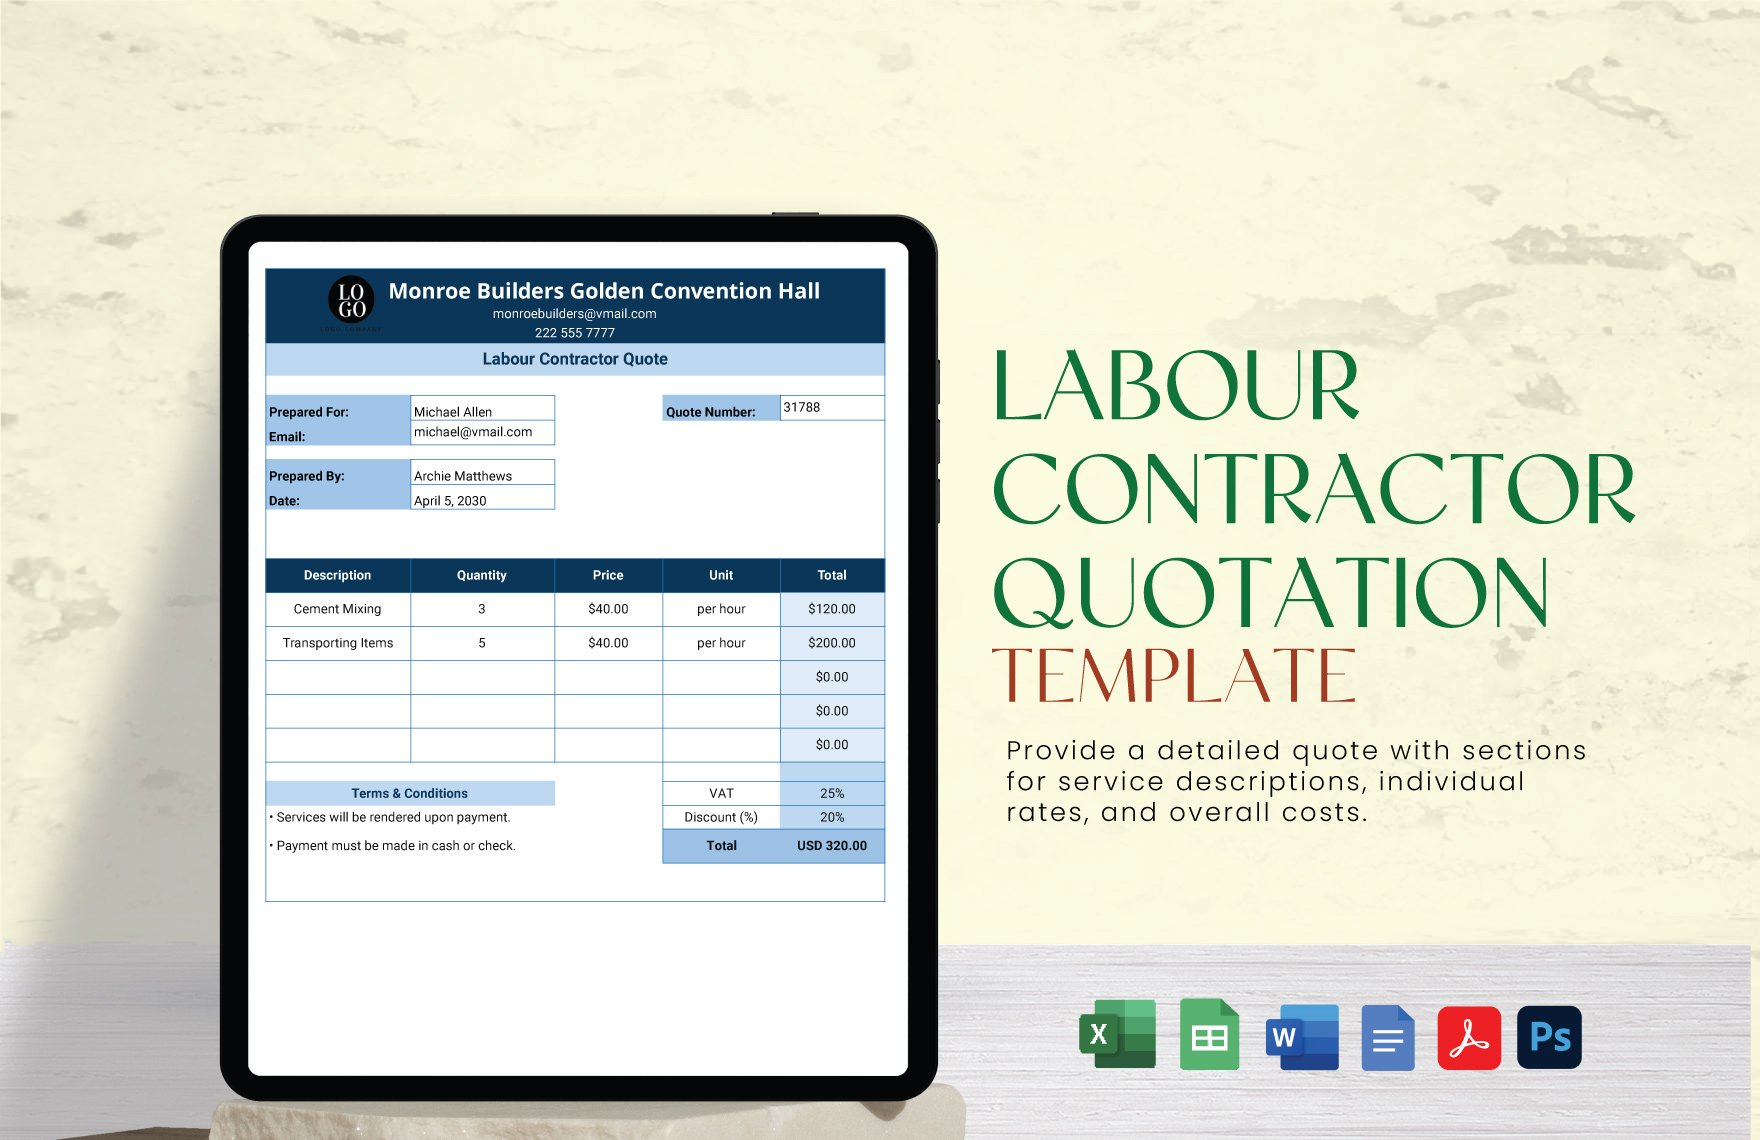 Free Labour Contractor Quotation Template in Word, Google Docs, Excel, PDF, Google Sheets, PSD